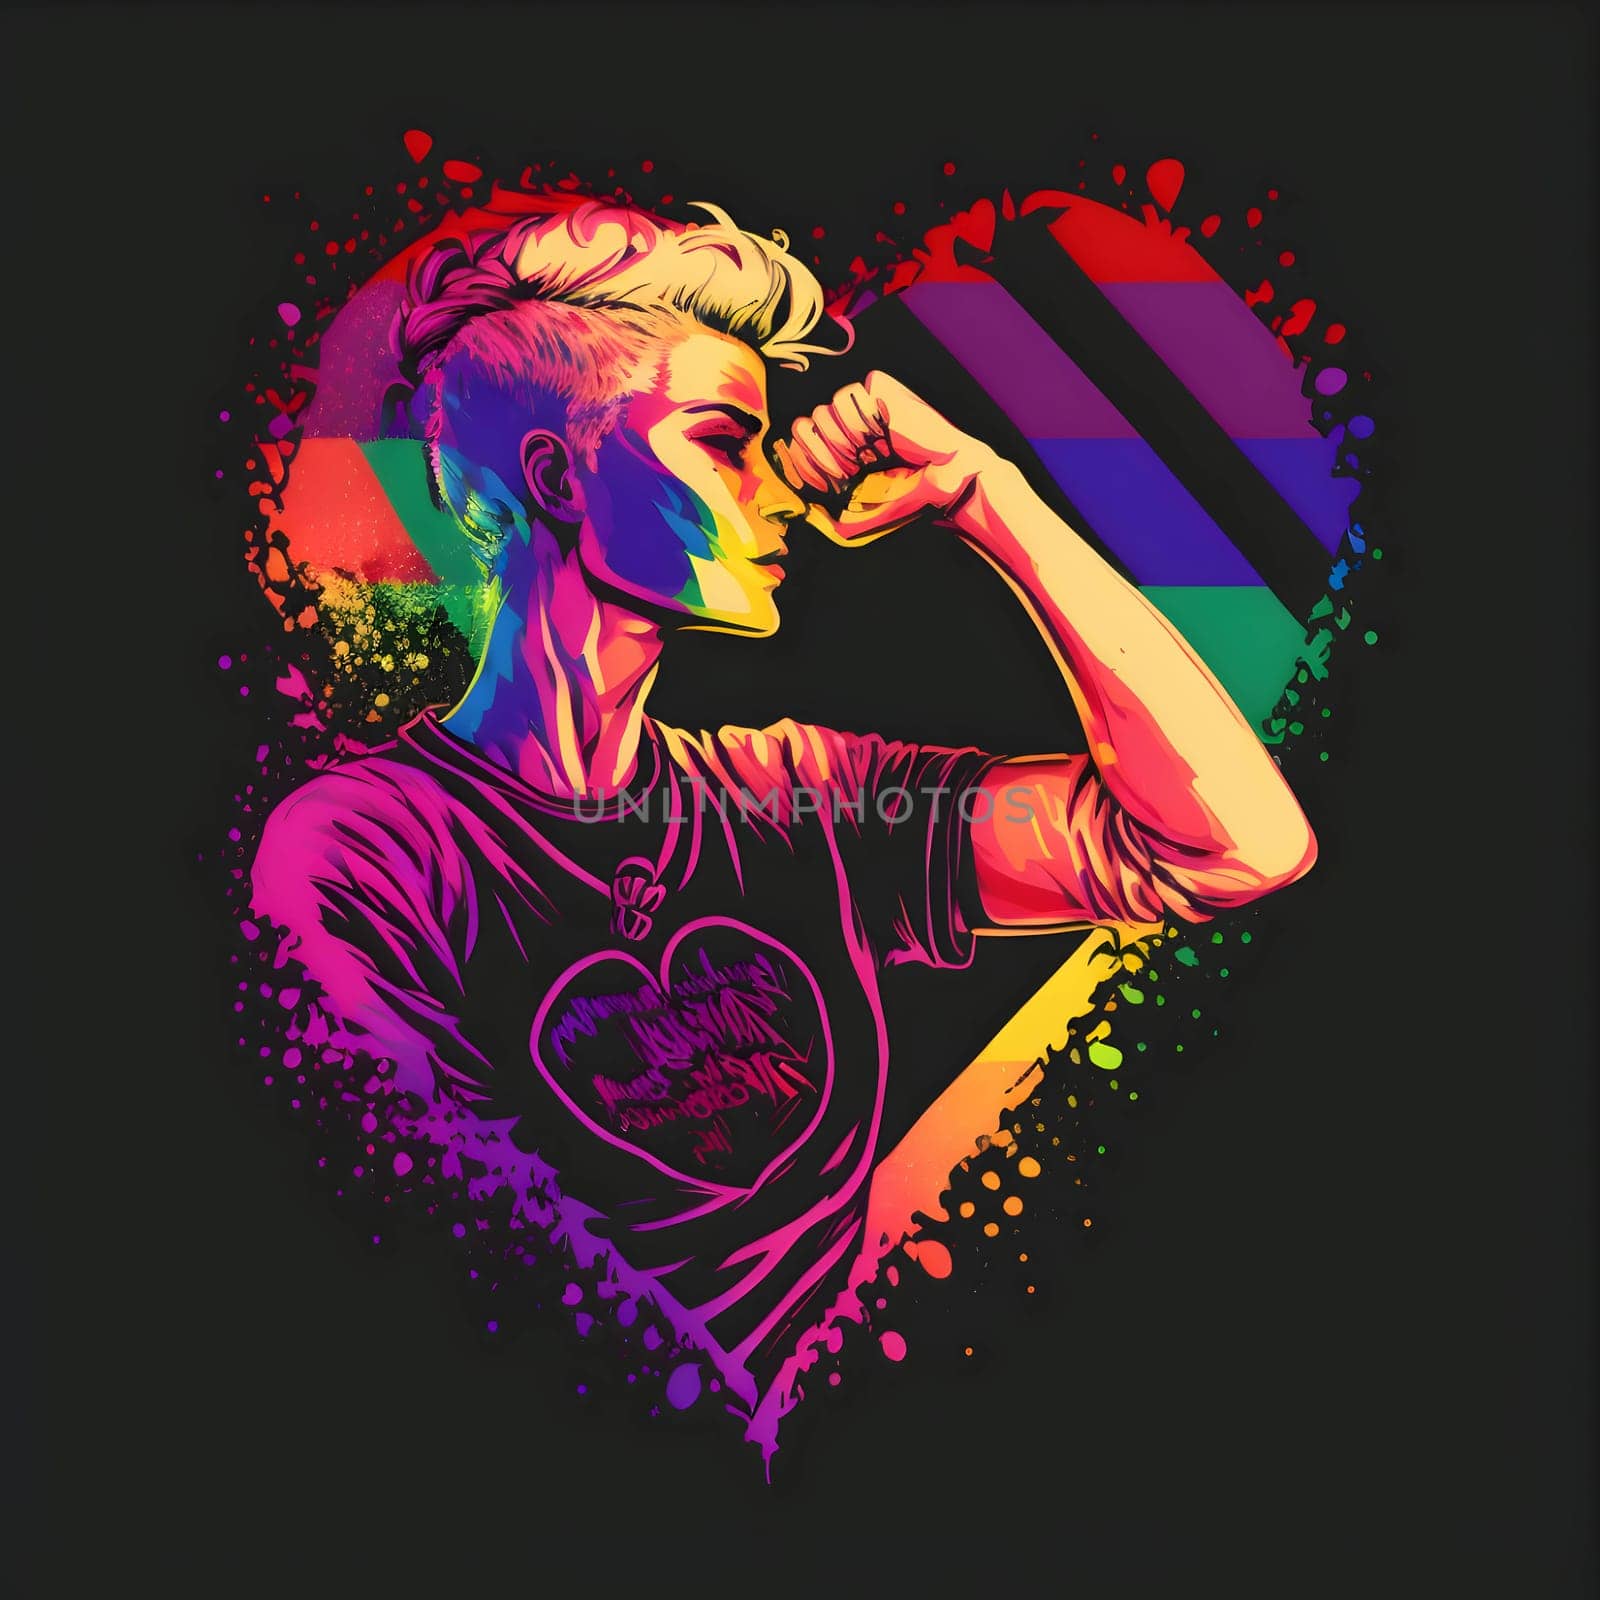 An illustration of a colorful heart in the vibrant colors of the LGBT pride flag, gently held in a hand, against a black background.